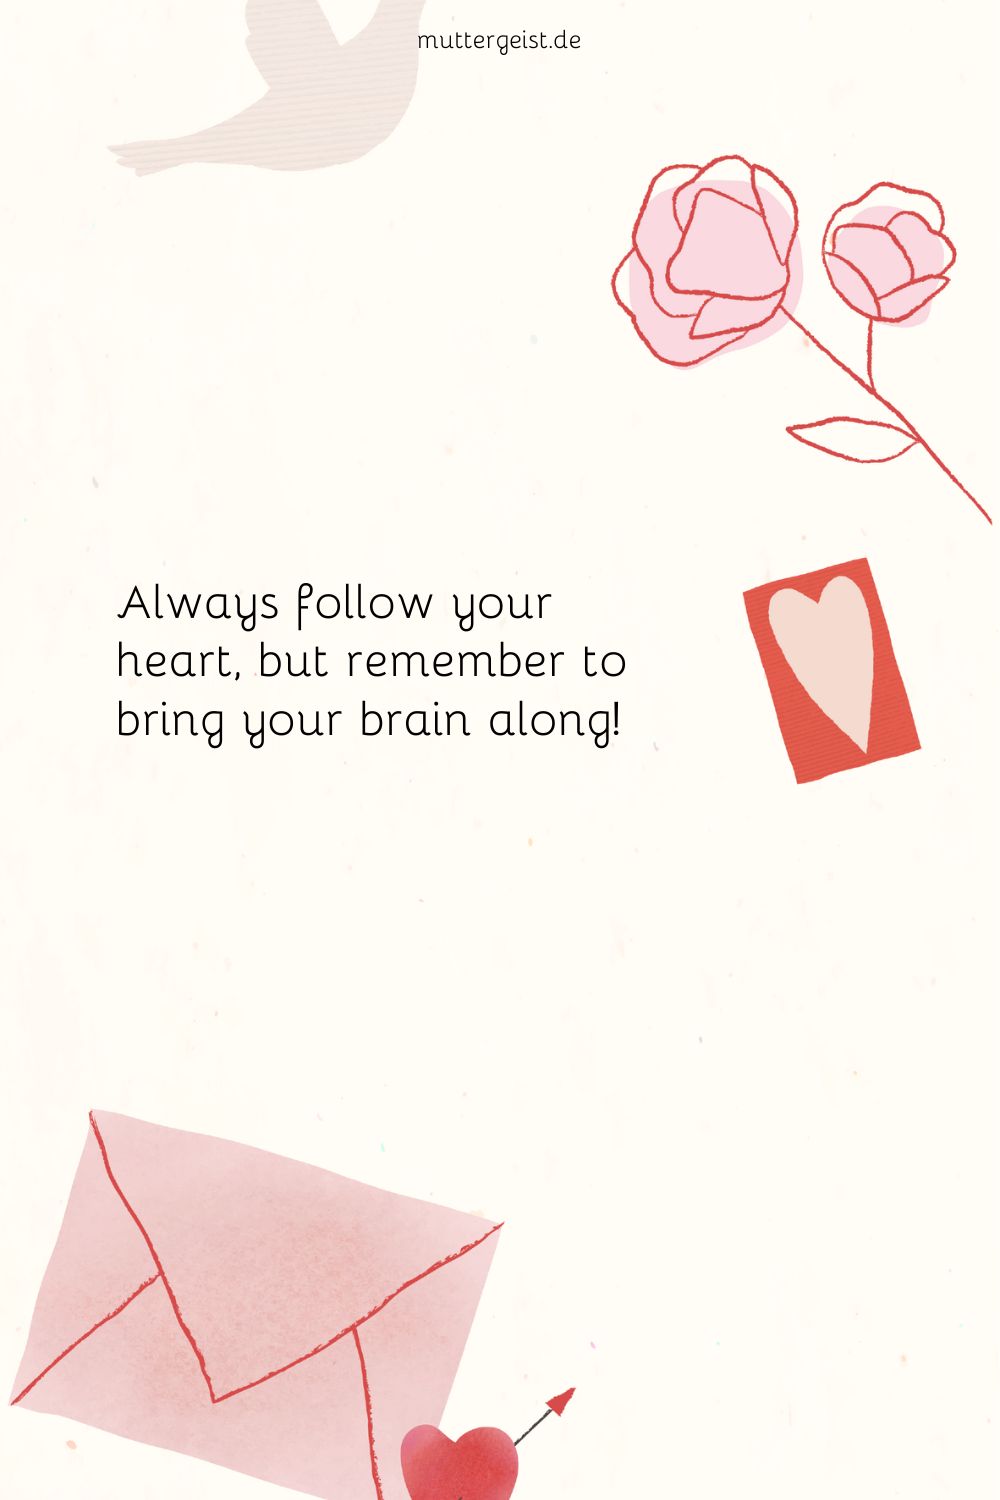 Always follow your heart, but remember to bring your brain along!